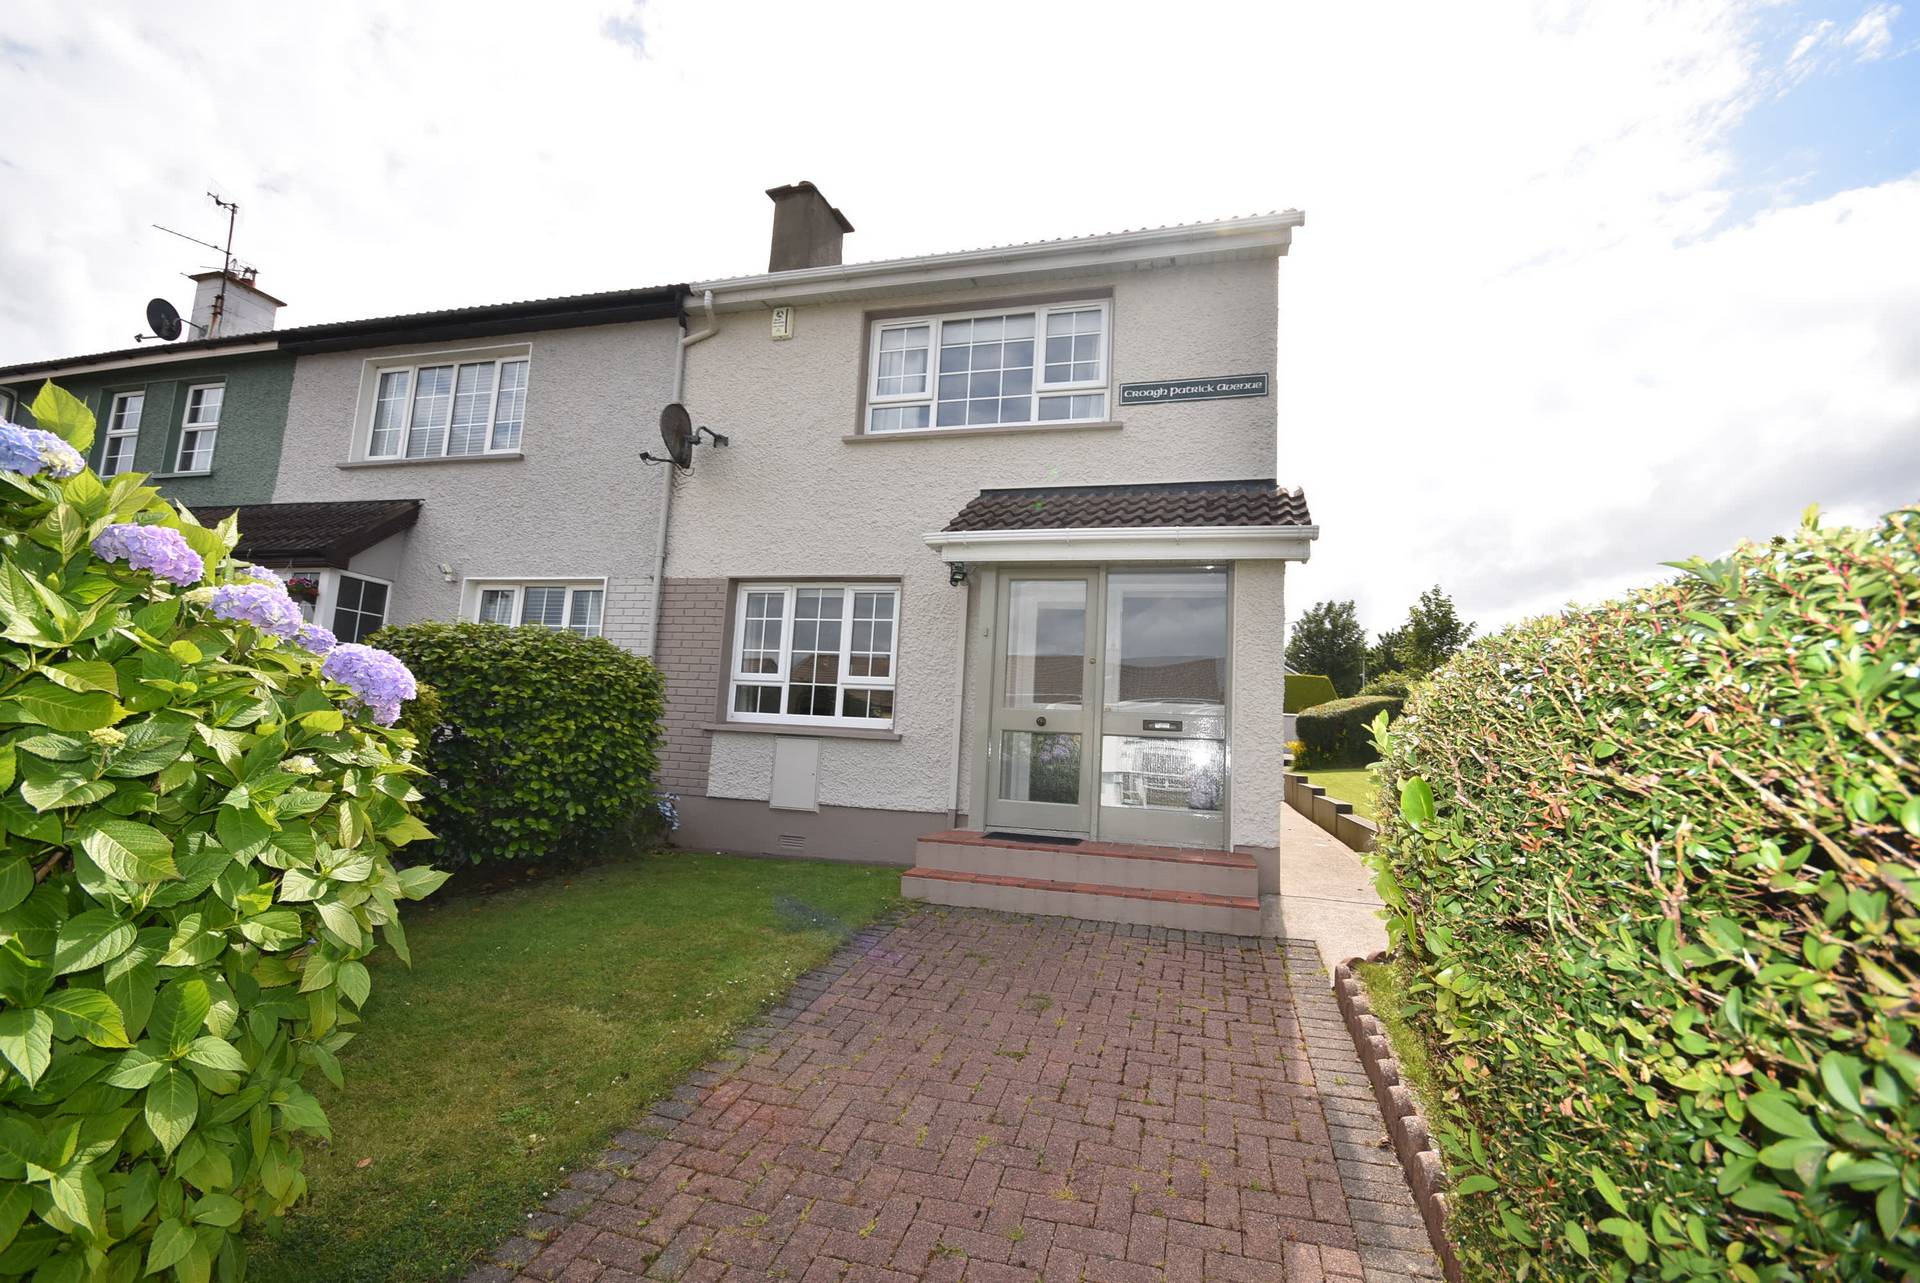 16 Croagh Patrick Avenue, Letterkenny, Co. Donegal, F92 RRY8